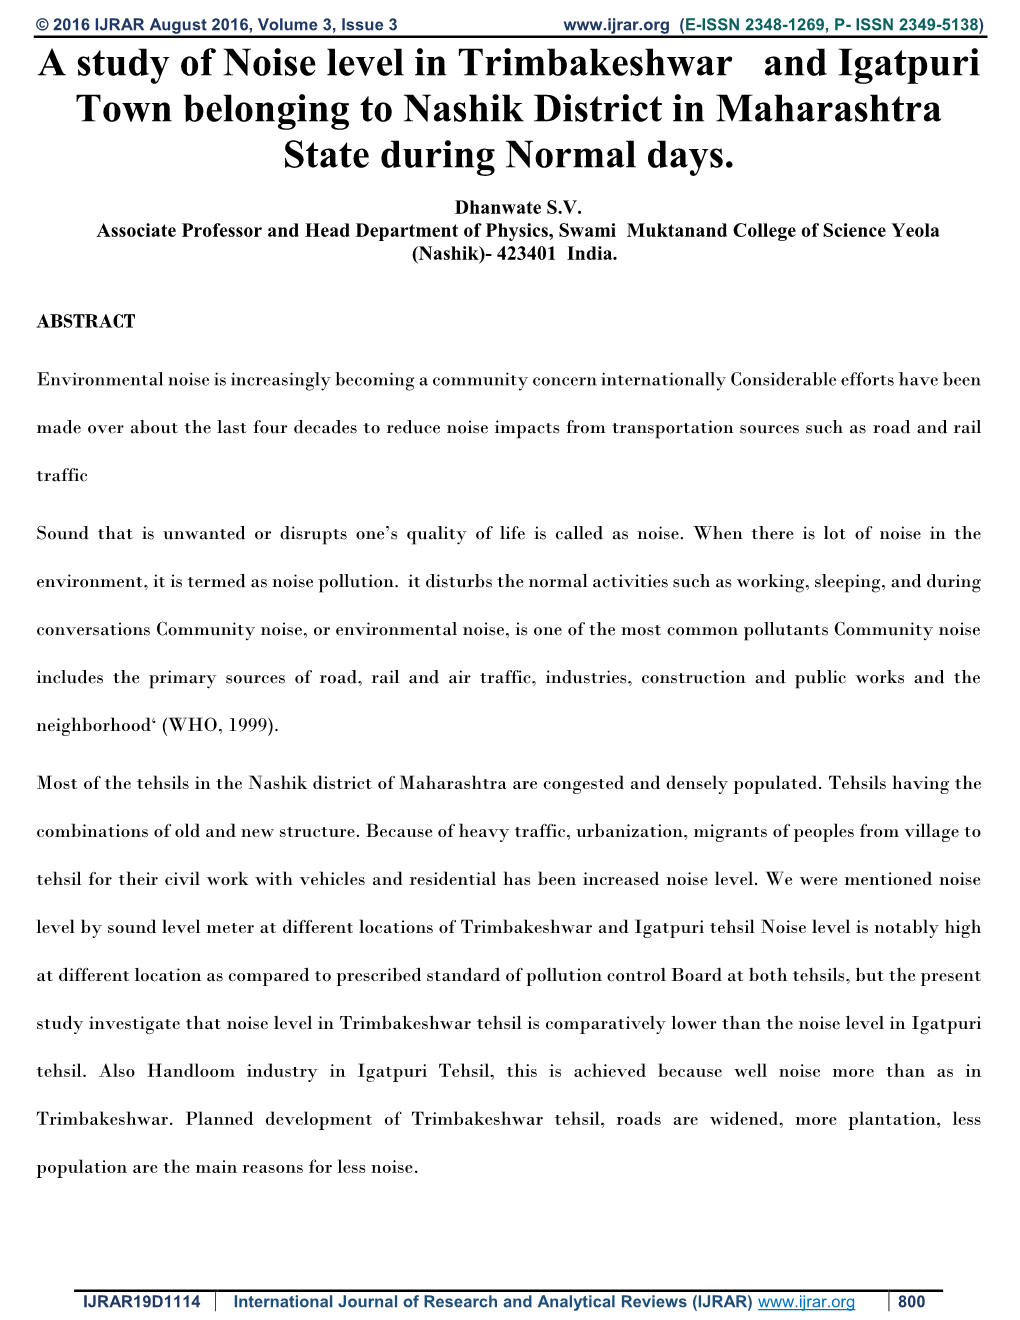 A Study of Noise Level in Trimbakeshwar and Igatpuri Town Belonging to Nashik District in Maharashtra State During Normal Days